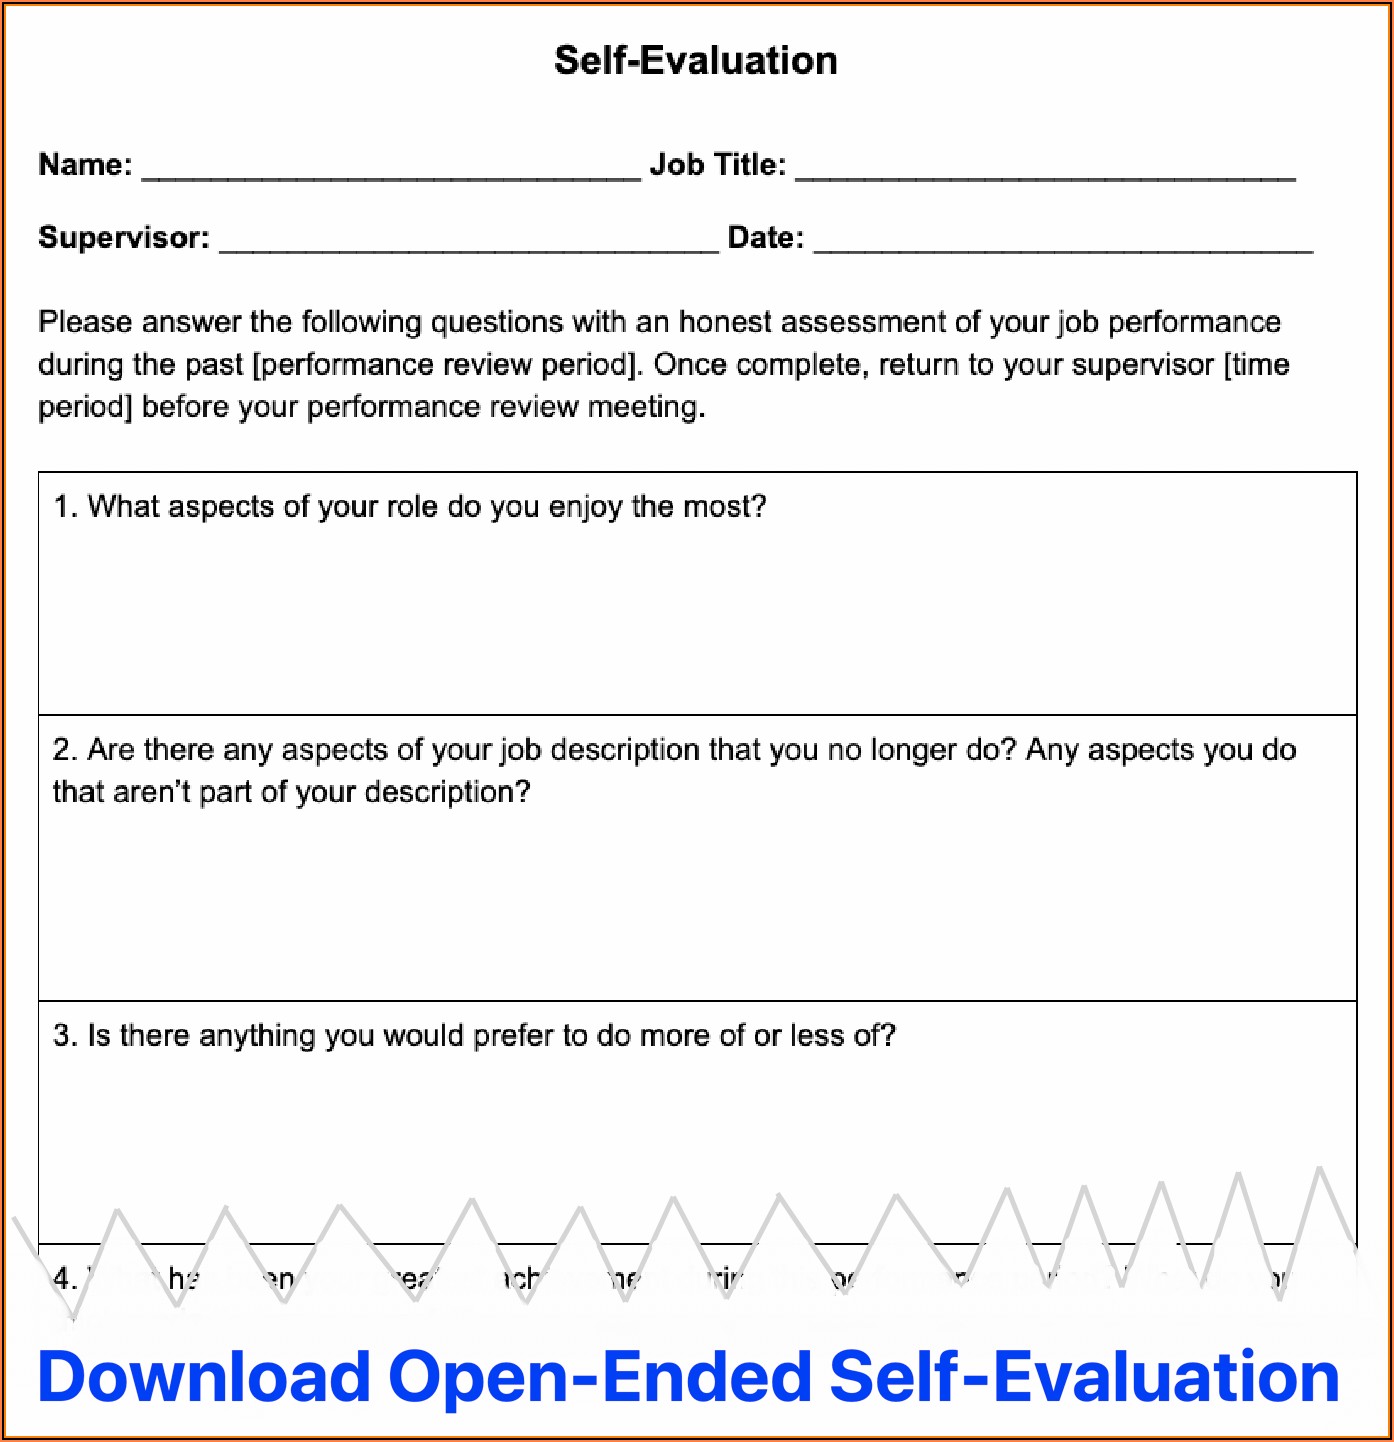 Annual Performance Review Employee Self Evaluation Forms